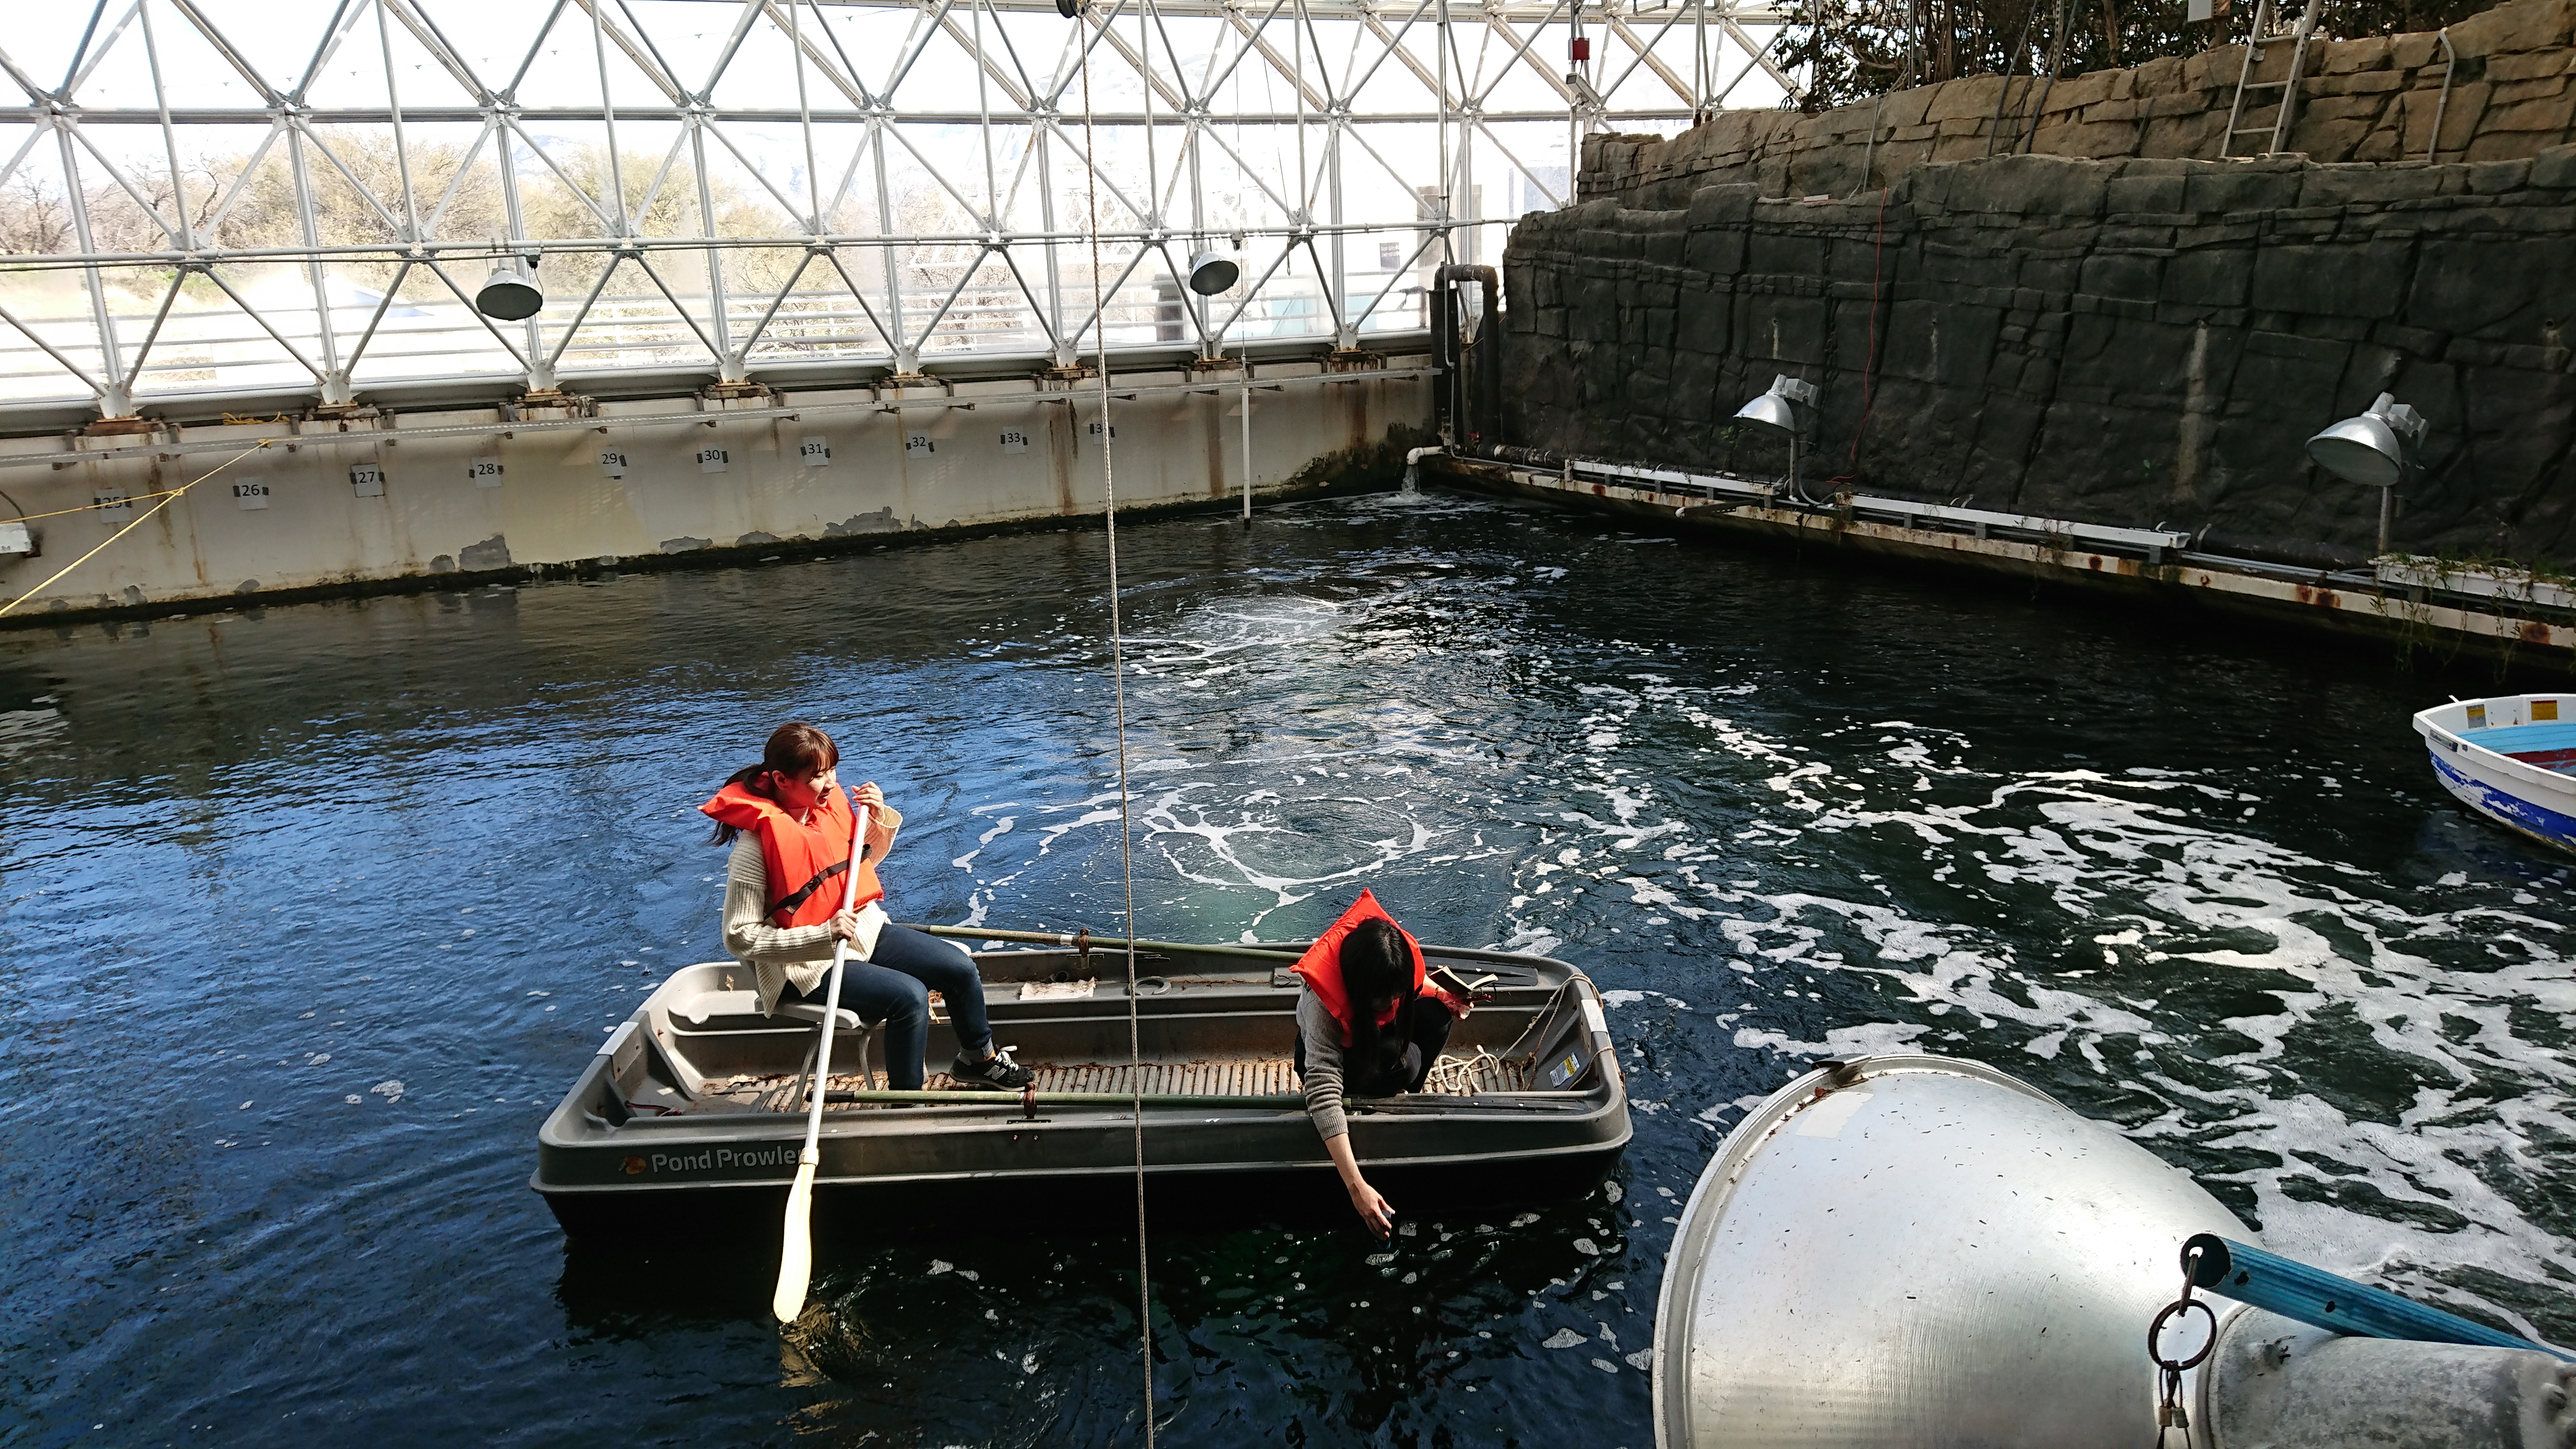 Participants from Kyoto University in a boat on the ocean at Biosphere 2